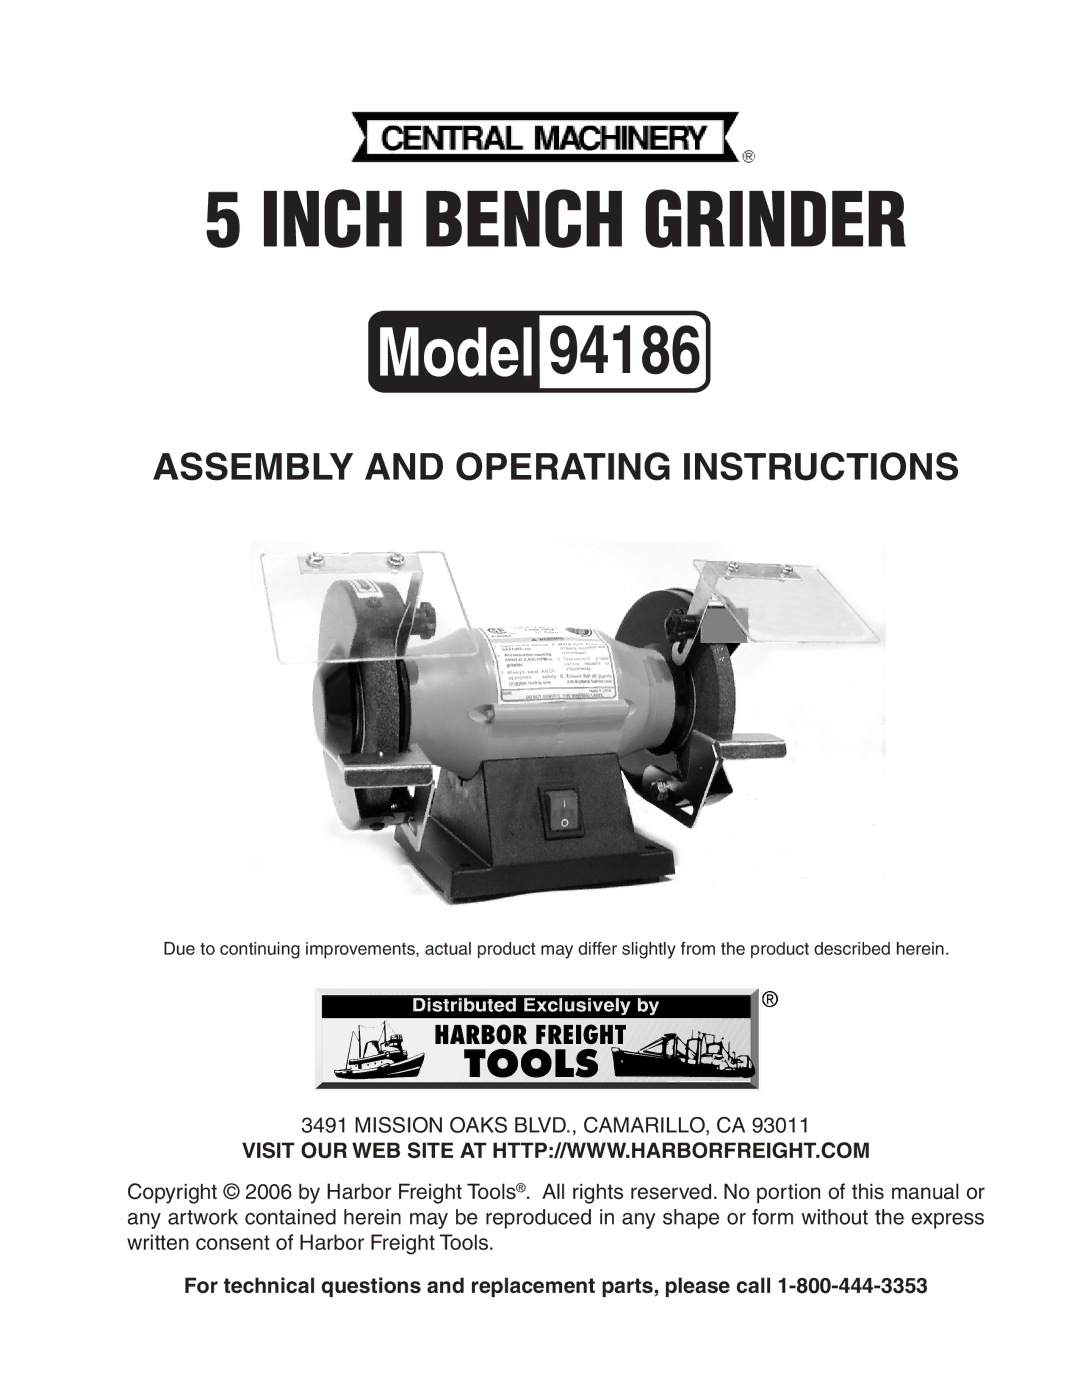 Harbor Freight Tools 94186 operating instructions Inch Bench Grinder 